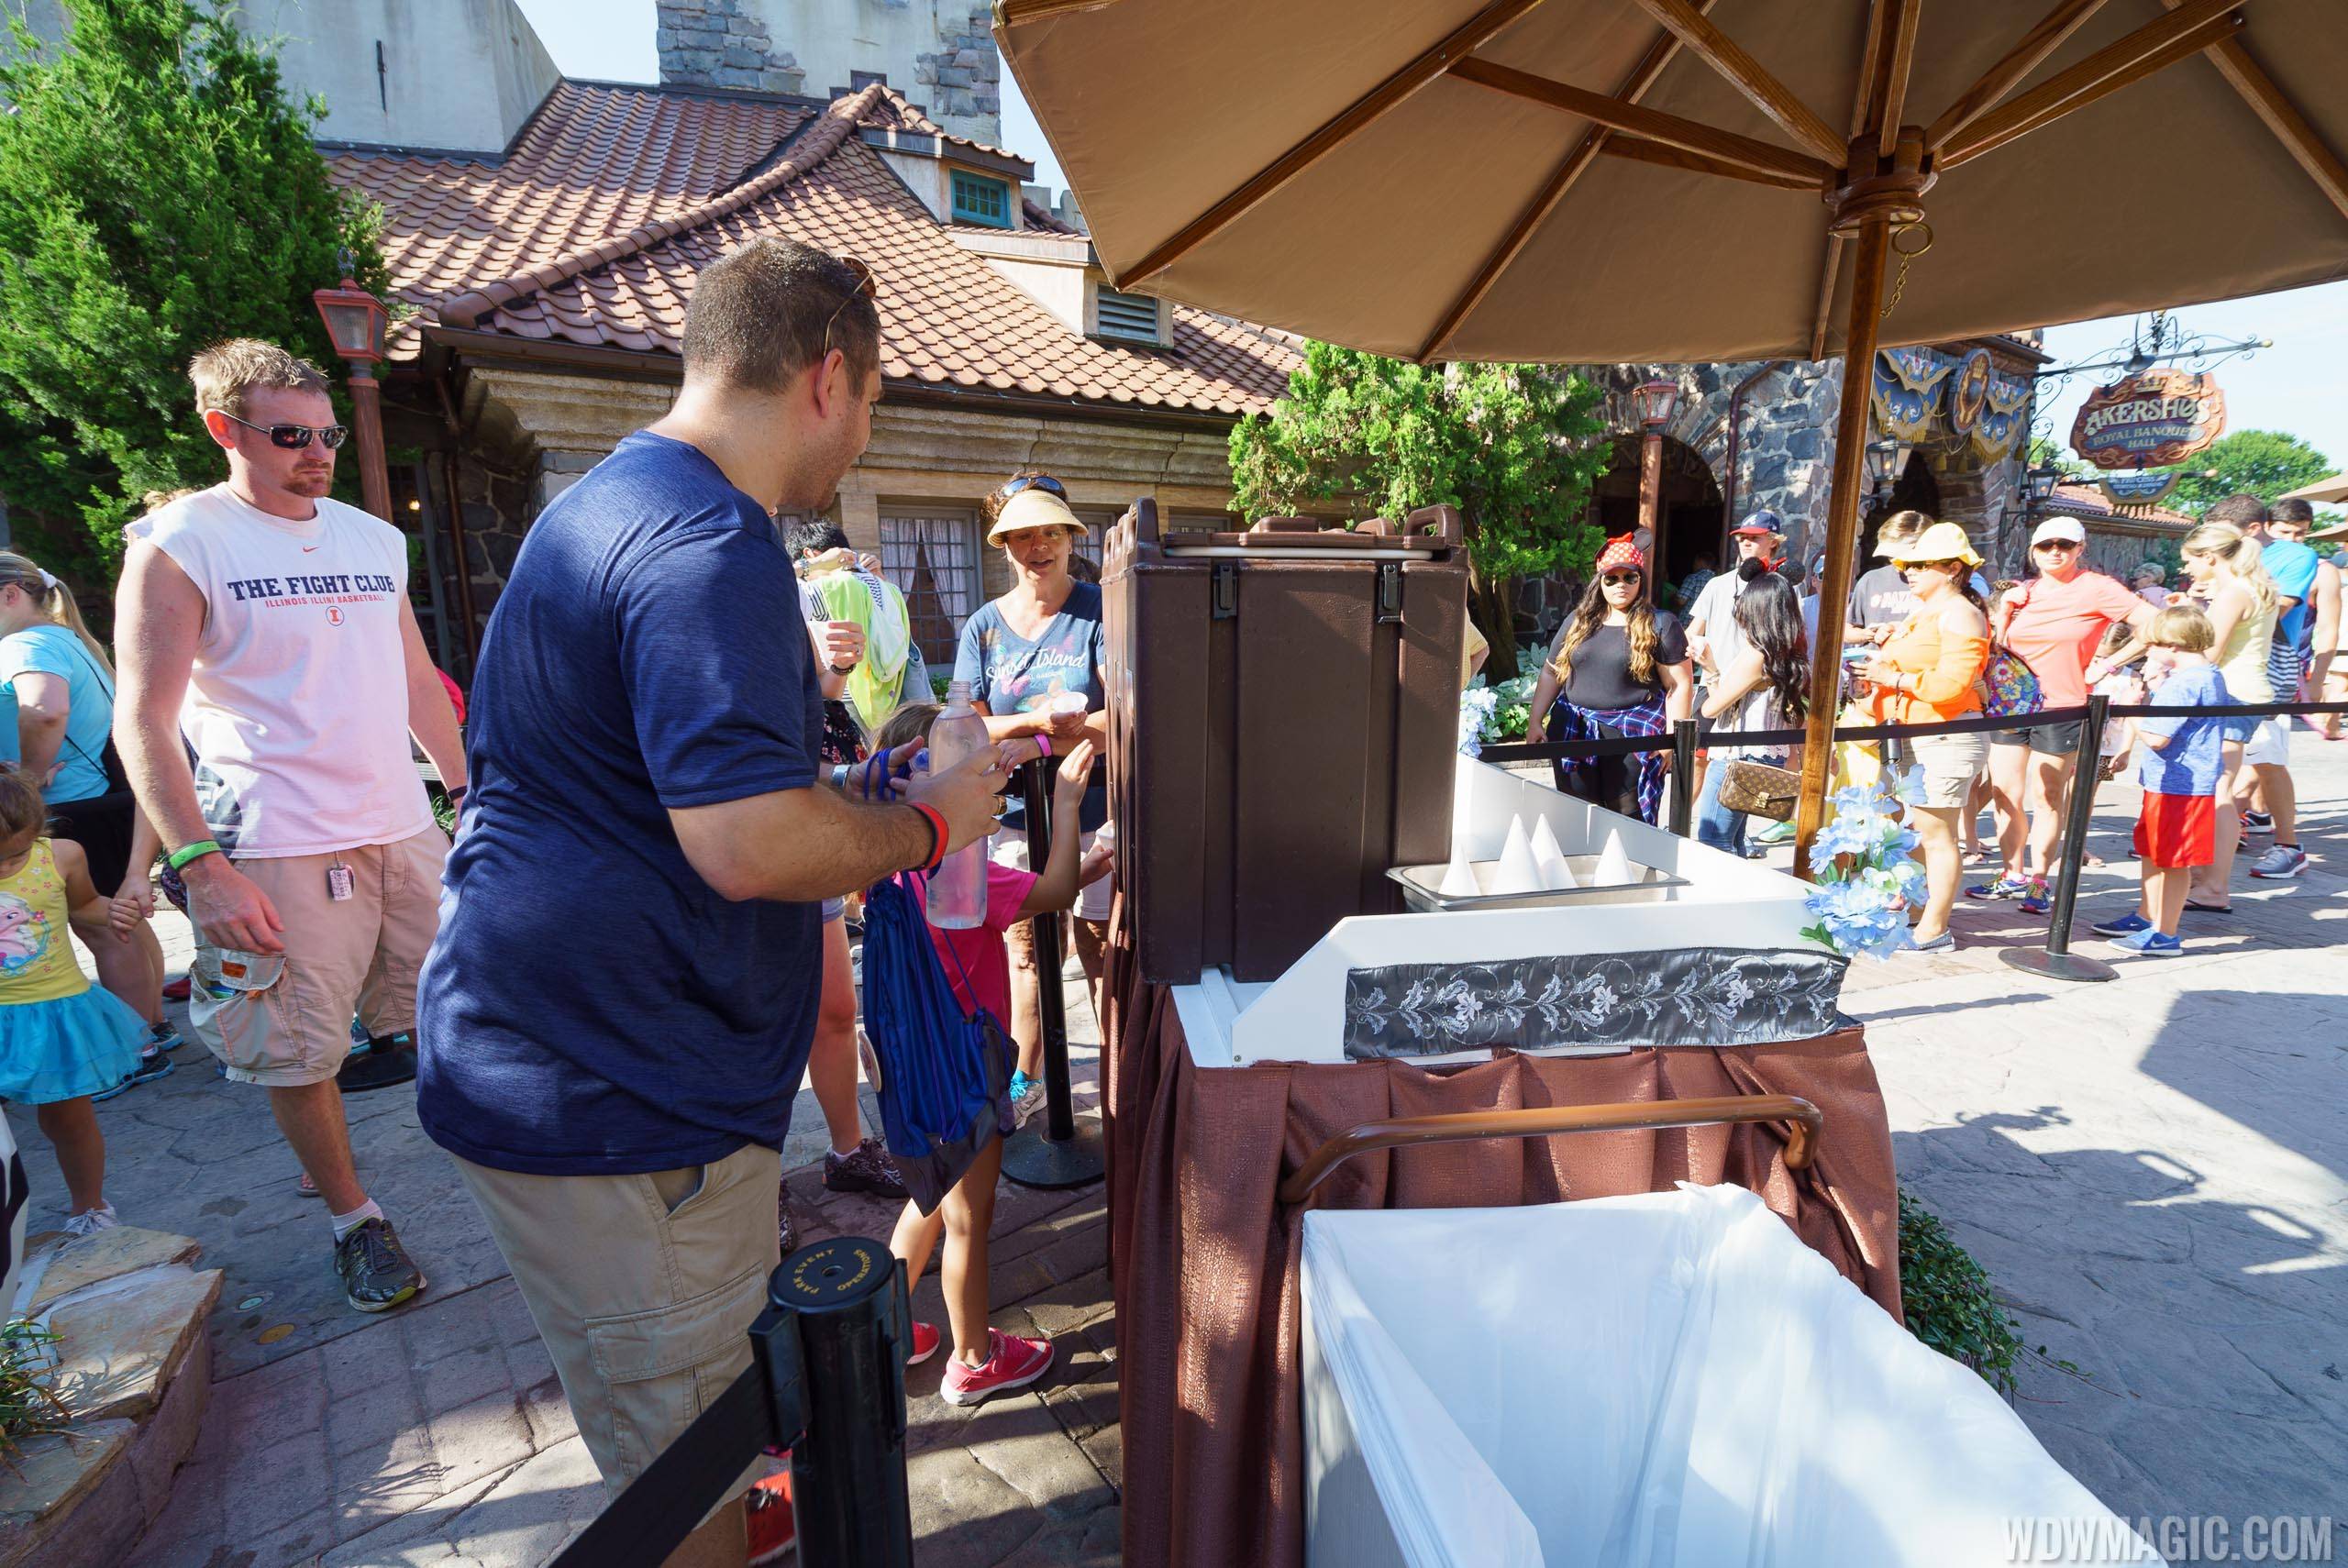 Frozen Ever After queue a week after opening